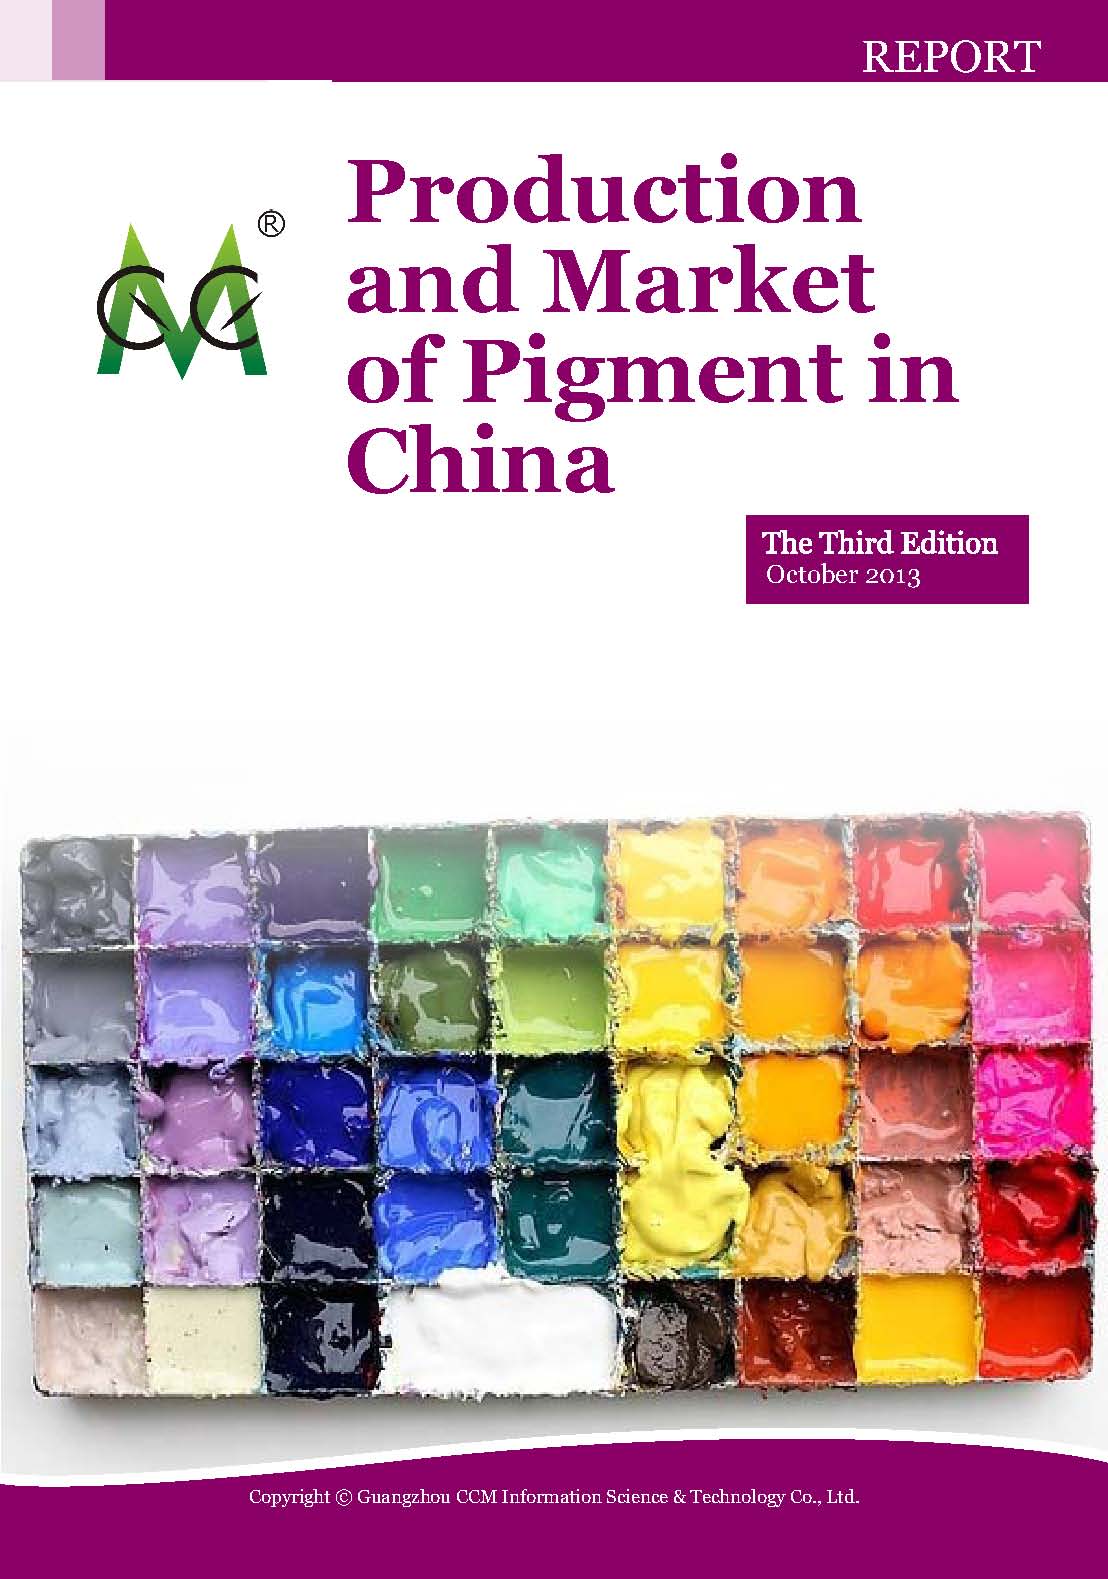 Production and Market of Pigment in China